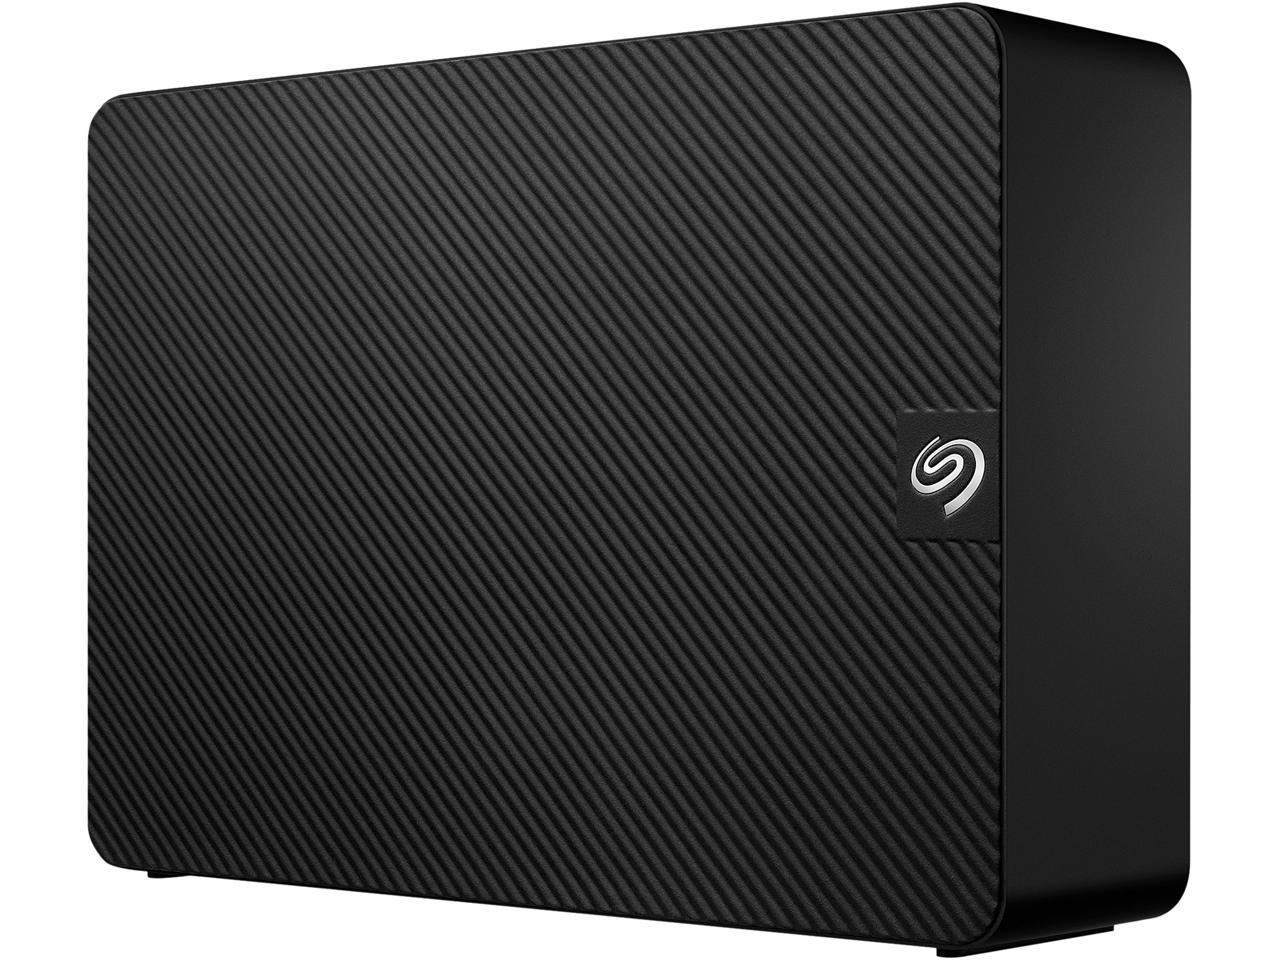 Seagate Expansion 14TB External Hard Drive w/Recovery svcs @Newegg $190